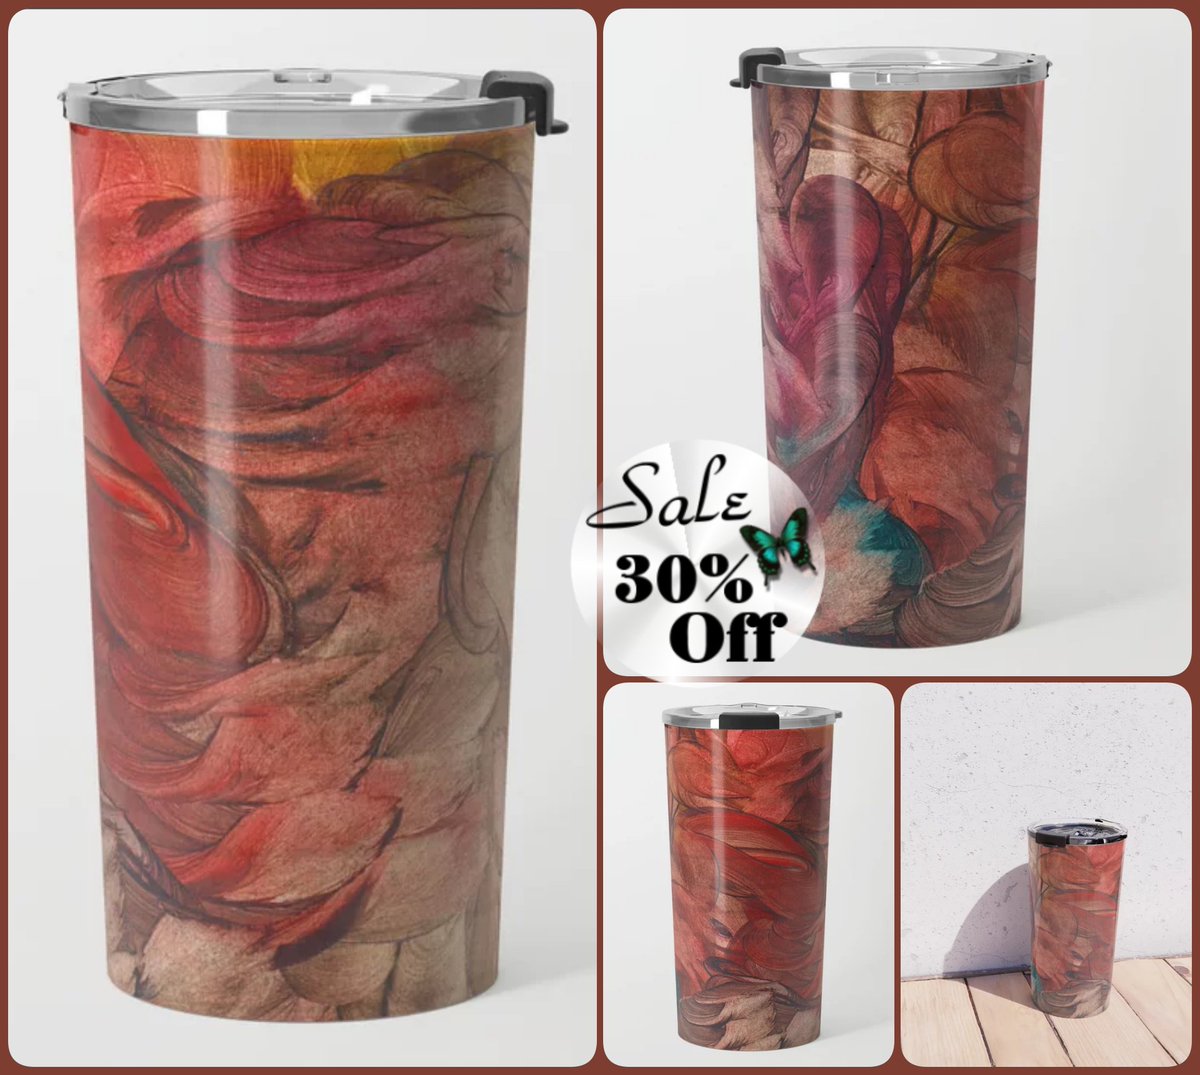 *SALE 30% Off* Enchanting Travel Mug~ by Art_Falaxy ~Art Exquisite!~ #coasters #gifts #trays #mugs #coffee #society6 #travel #artfalaxy #art #accents #modern #trendy #wine #water #placemats #tablecloths #runners #red #purple #orange #blue society6.com/product/enchan…